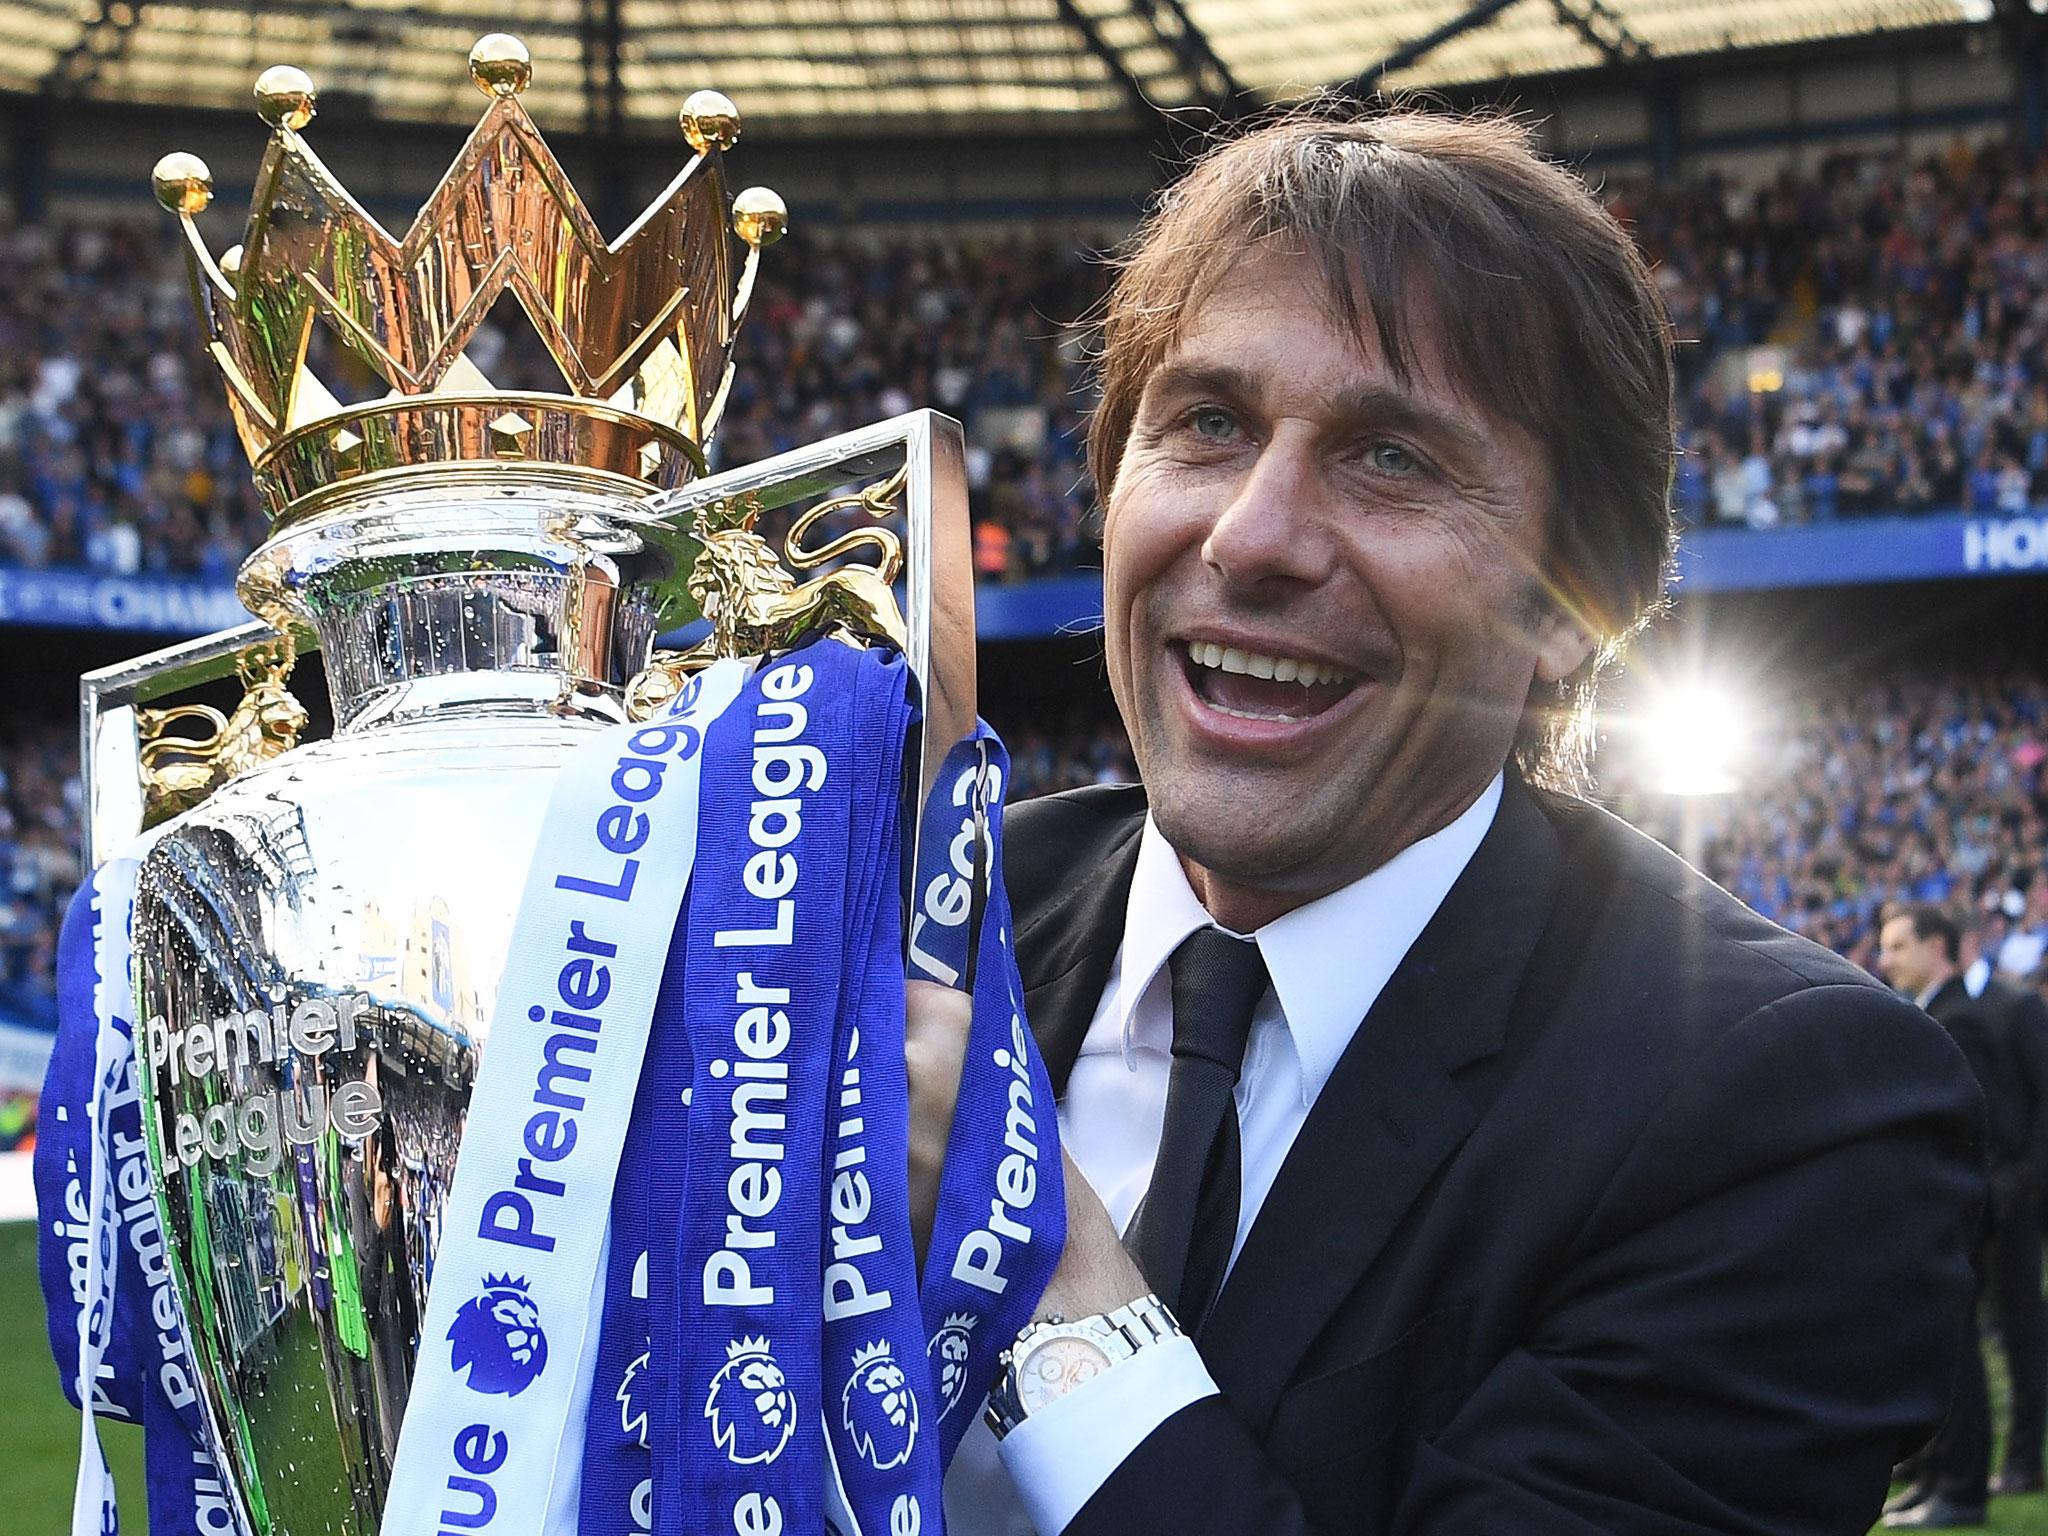 Antonio Conte wants to stay at Chelsea for "many years"